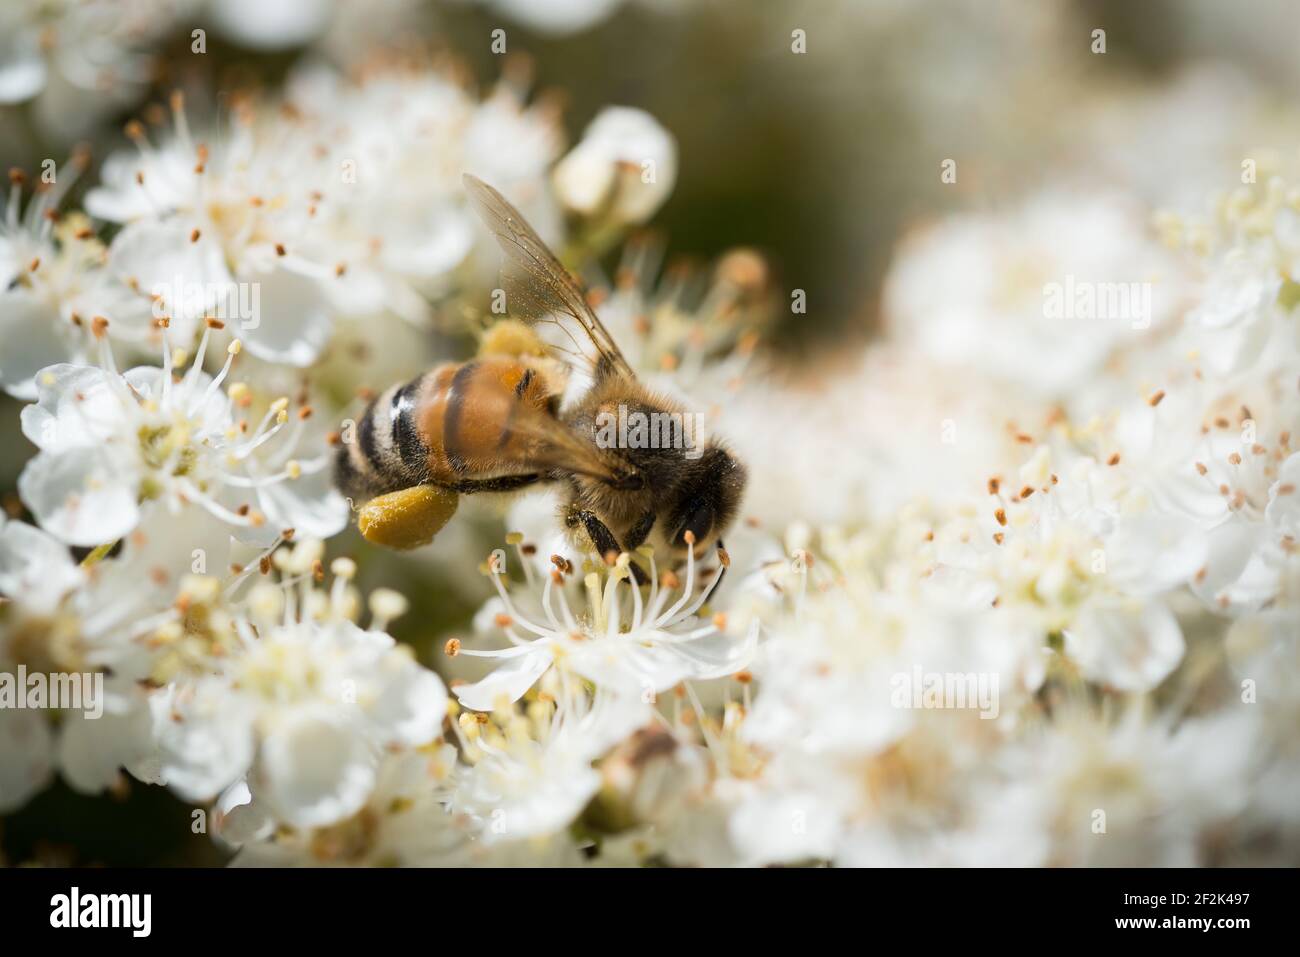 A European honey bee (Apis mellifera) on the flowers of a firethorn, or pyracantha, in a garden in Exeter, Devon, UK. Stock Photo